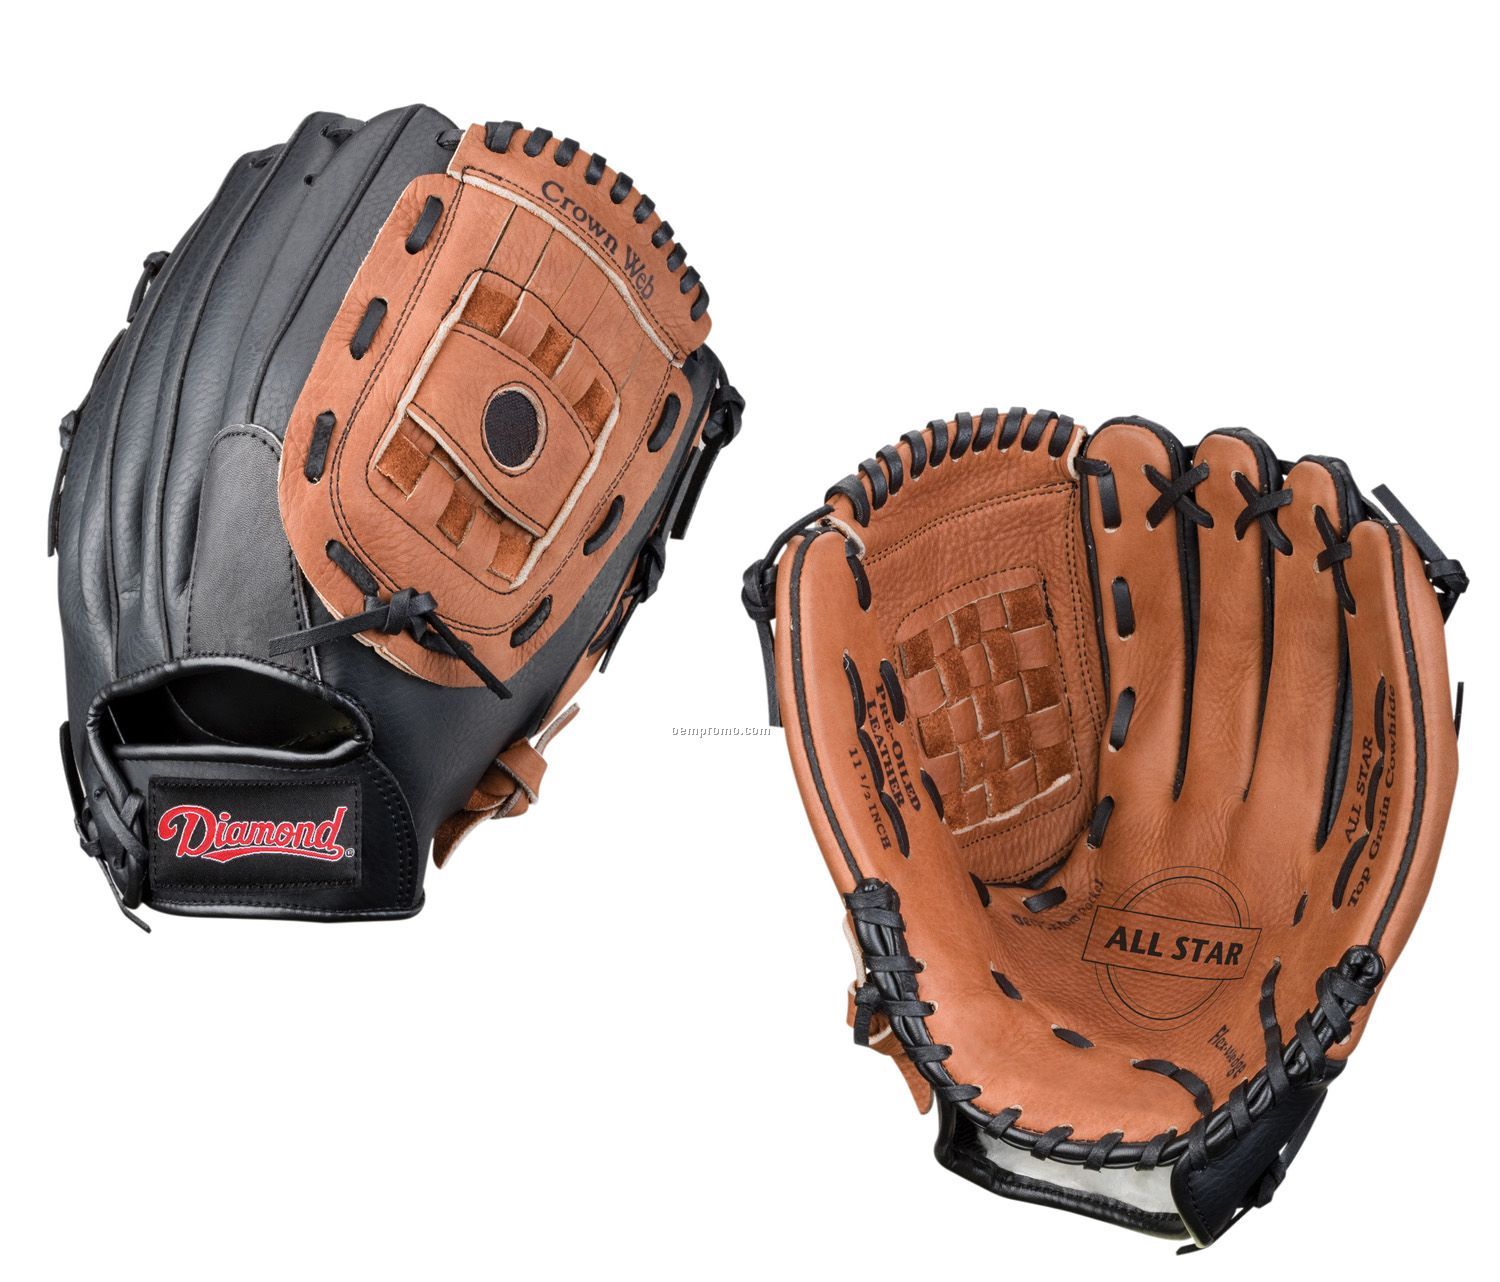 Diamond 11.5" Youth Baseball Glove For Right Handed Thrower,China ...